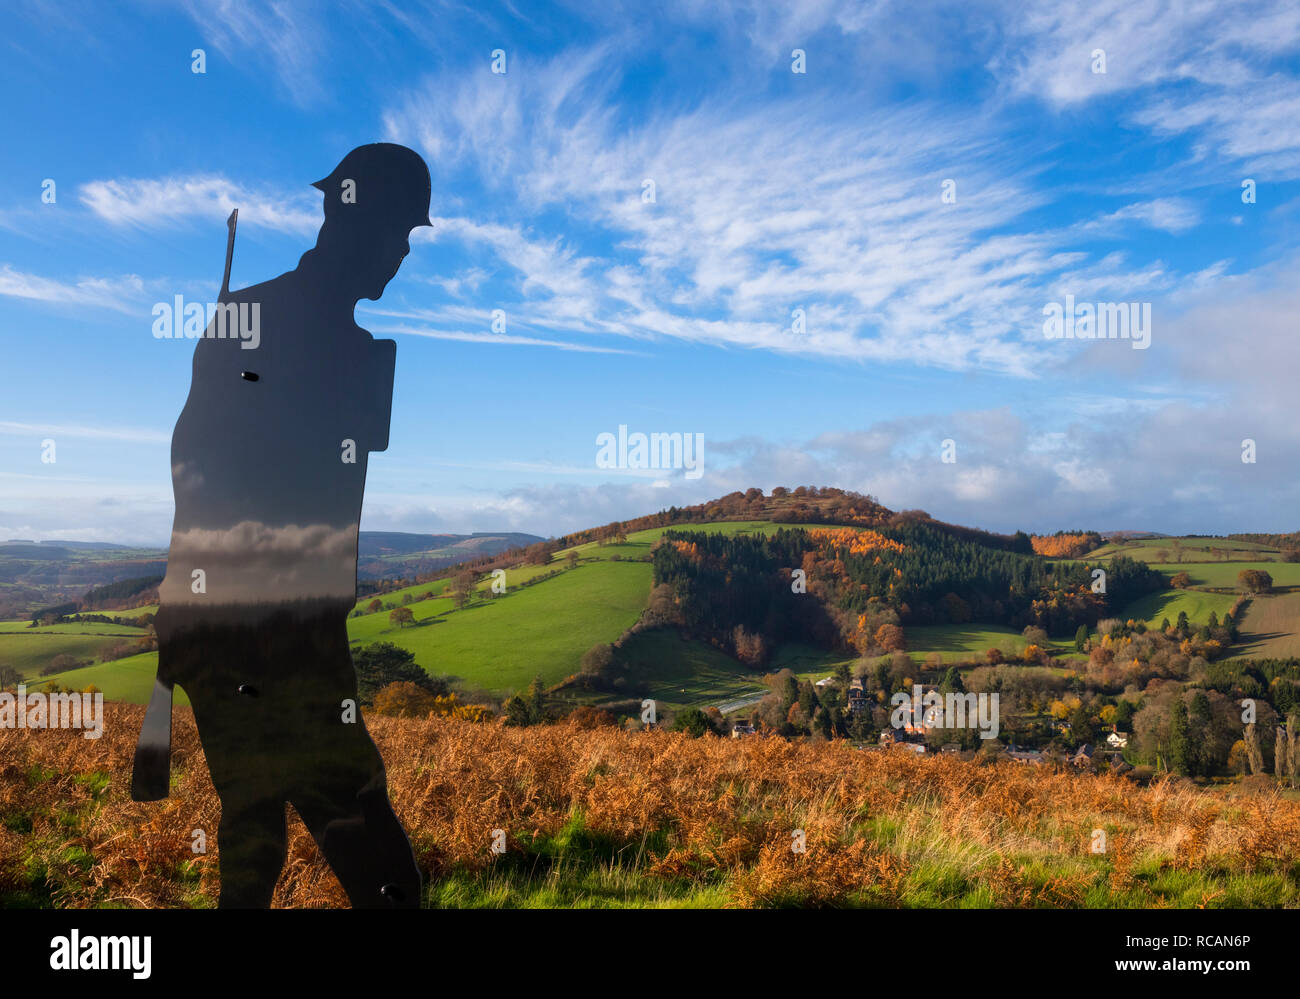 A Silent Silhouette above the village of Hopesay, Shropshire, to mark the final year of the World War One centenary. Stock Photo